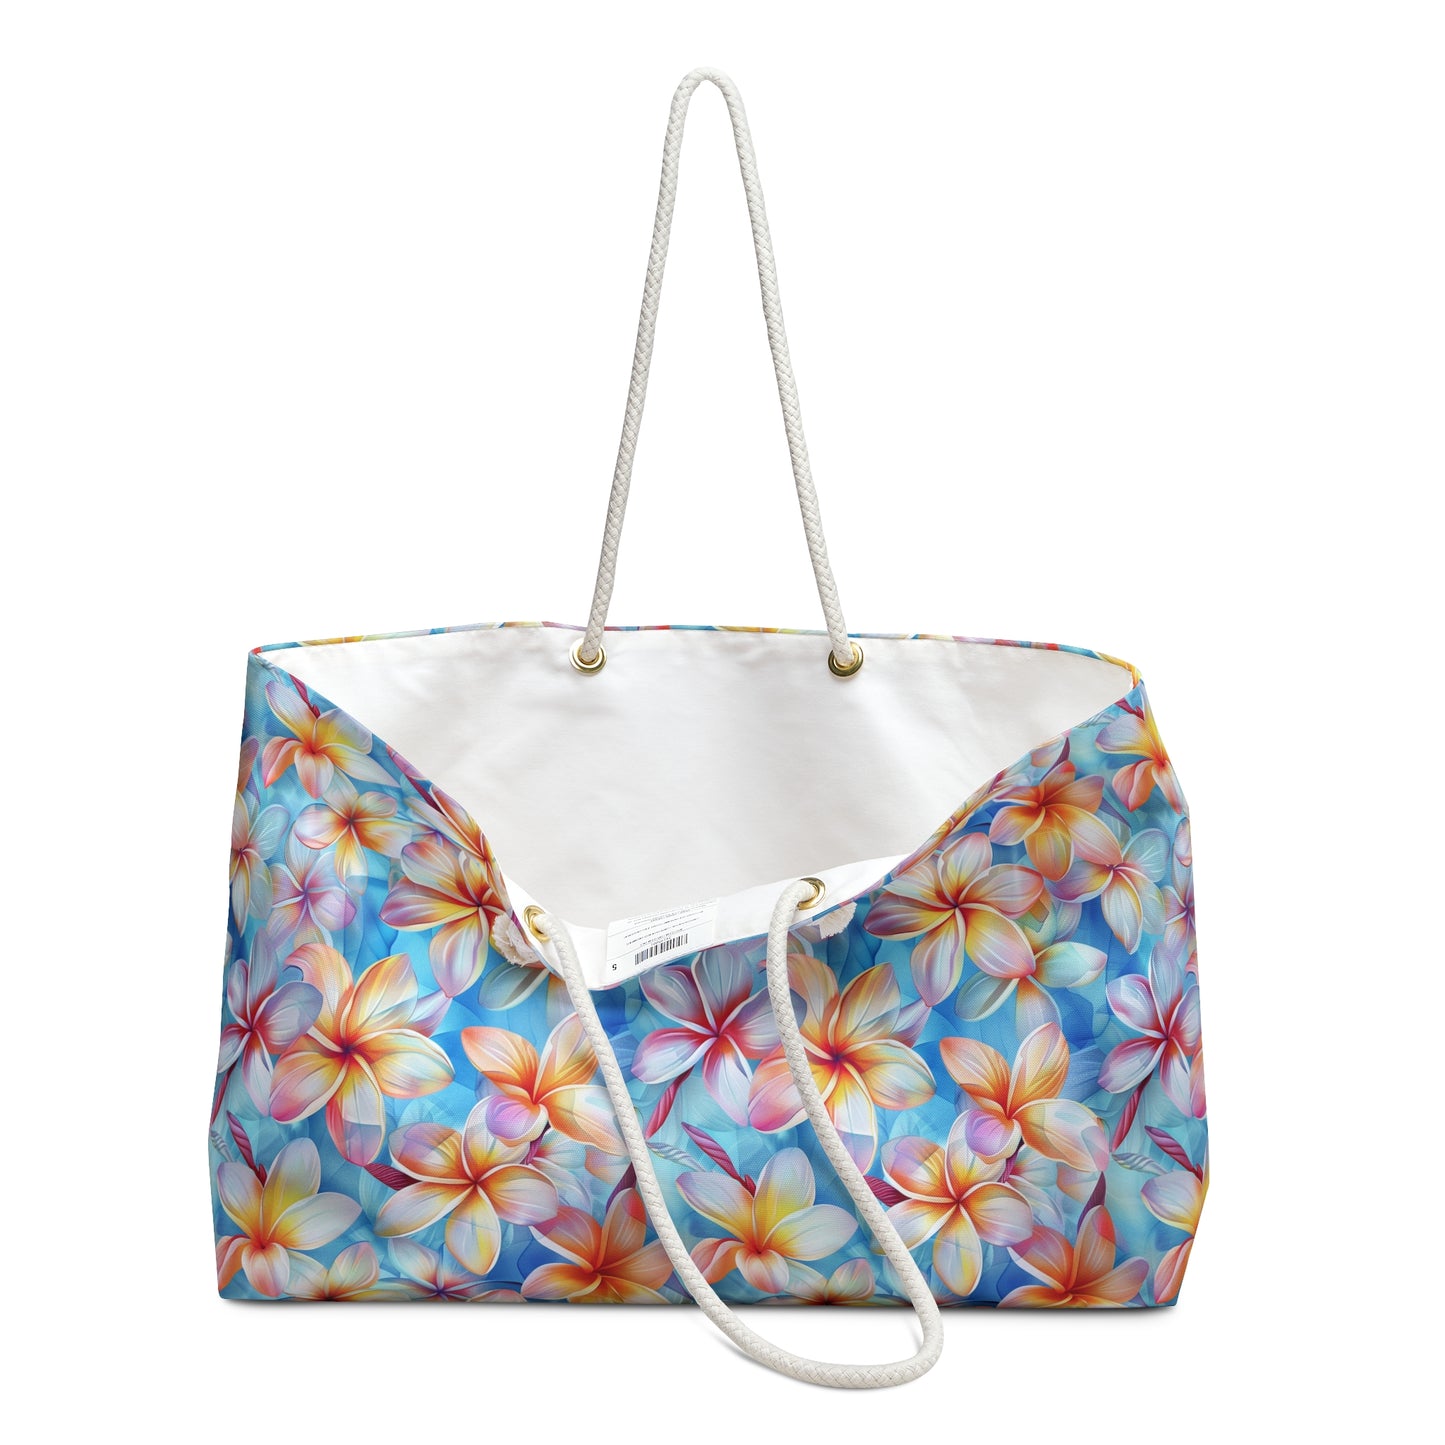 Deluxe Floral Tote & Beach Bag with Liberty Print Plumeria Design (24" × 13" x 5.5")